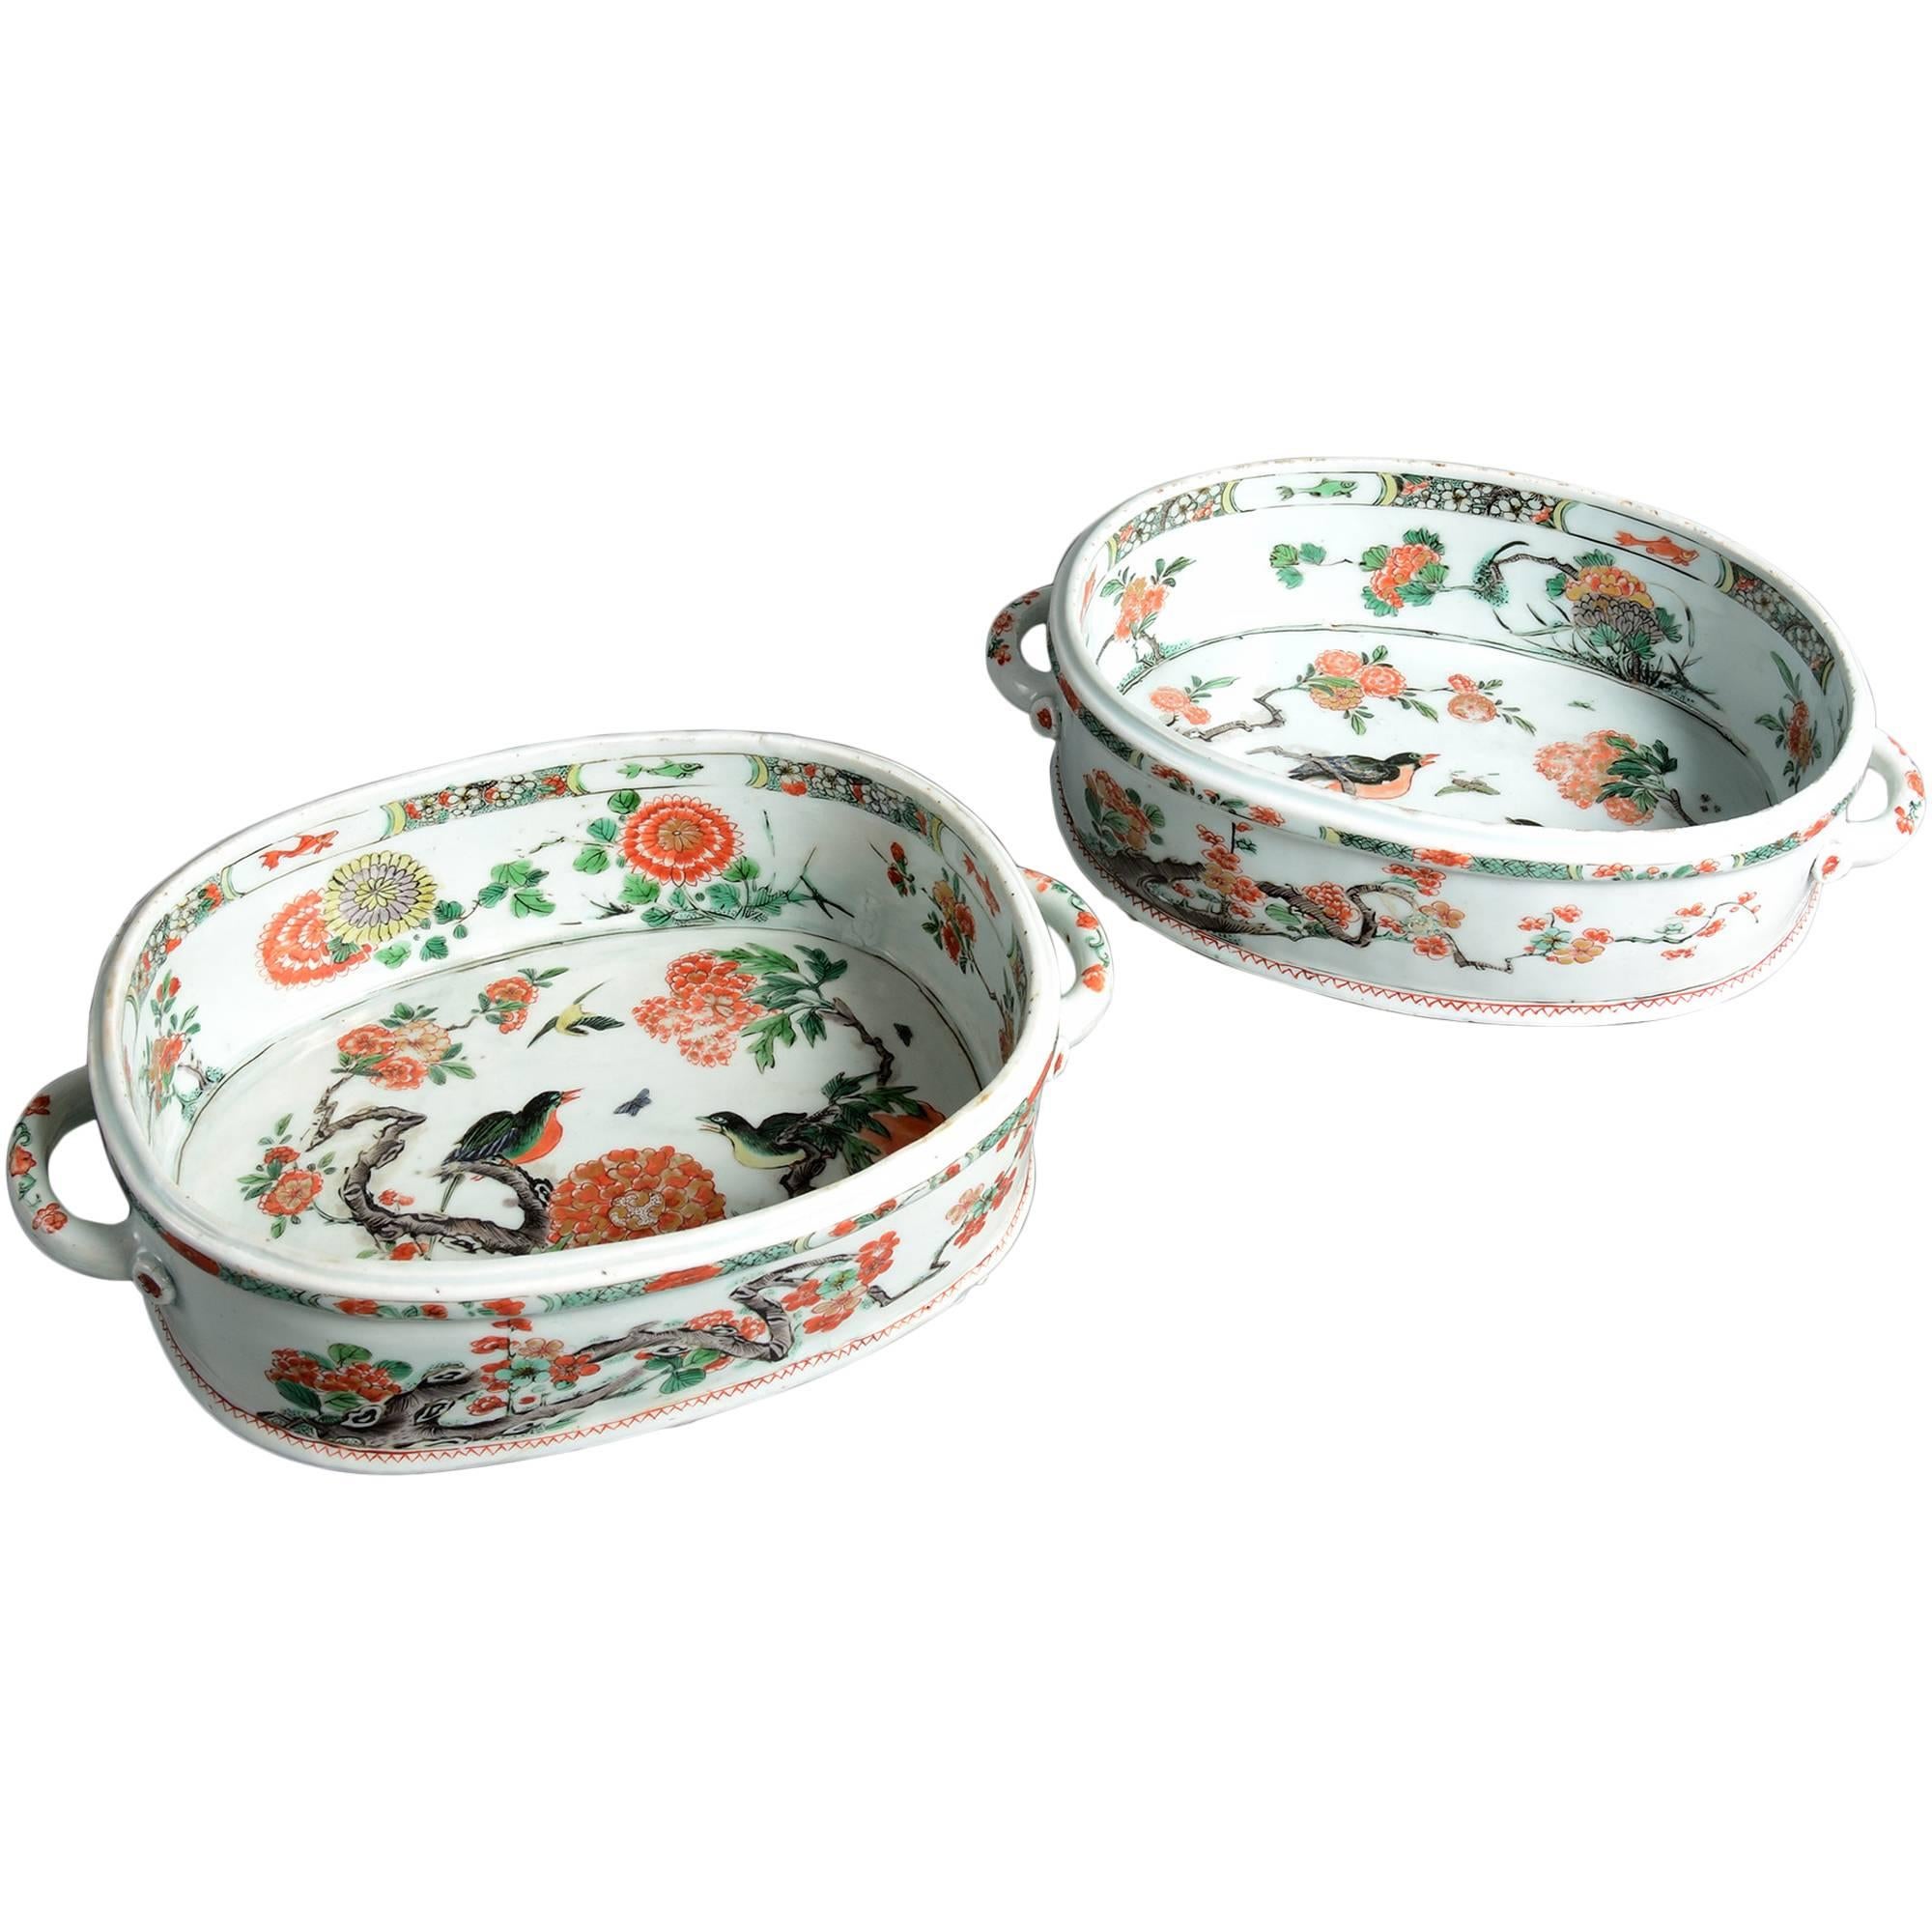 Two Qing 18th Century Kangxi Oval Porcelain Jardinières with stylized peonies